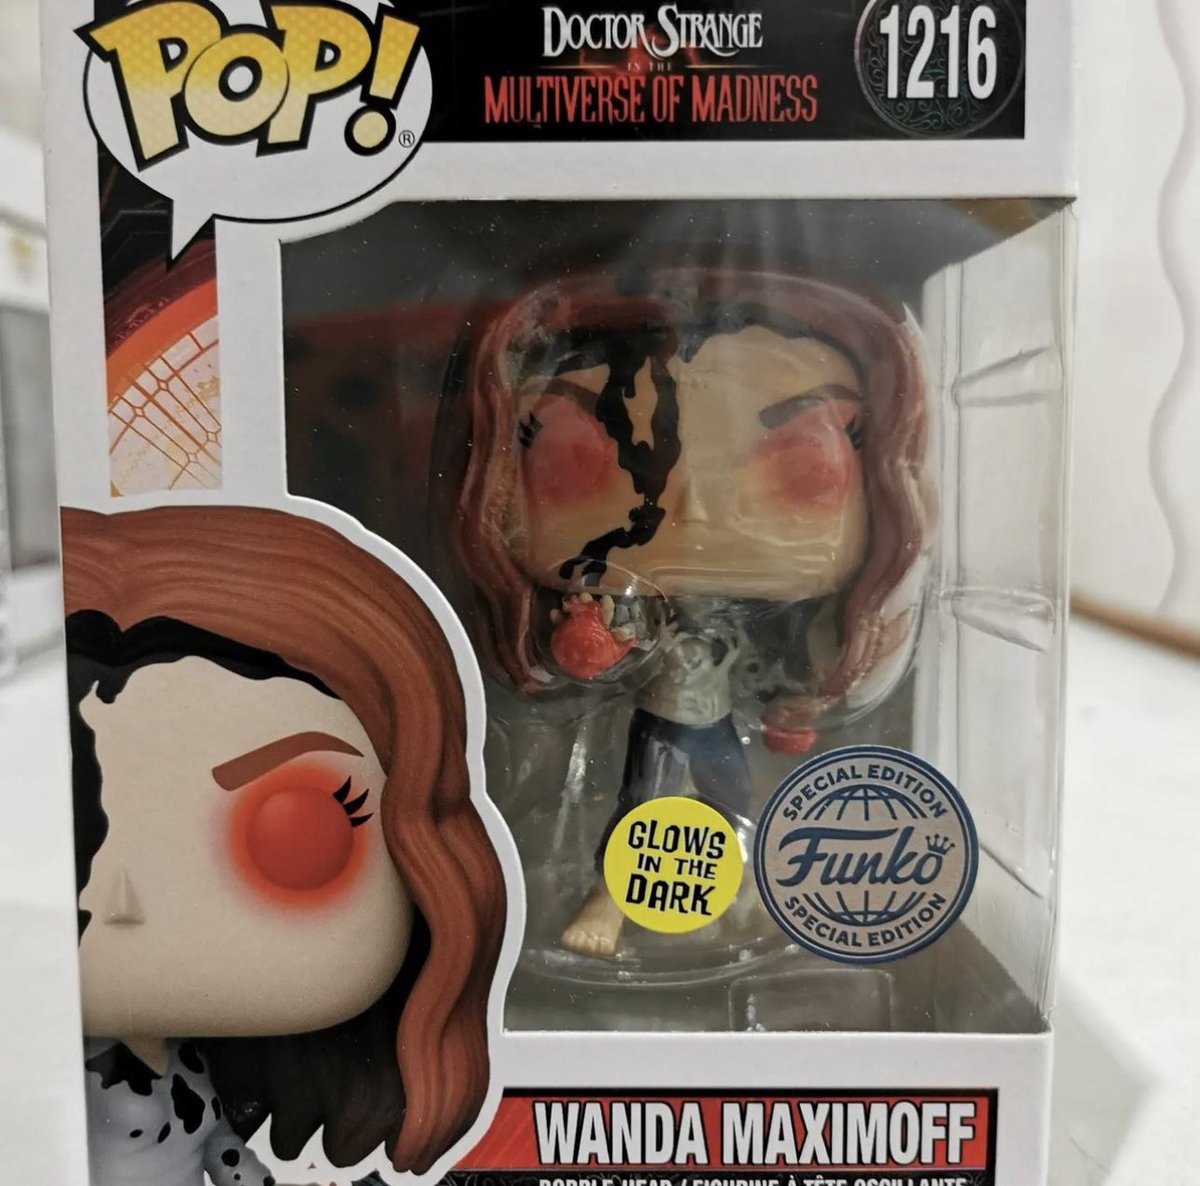 A look at the glow on EE exclusive Wanda Maximoff! Available for preorder. #Ad #Marvel
.
entertainmentearth.com/product/fu838w…
.
Credit @popwiz85
#Wanda #WandaMaximoff #doctorstrangeinthemultiverseofmadness #multiverseofmadness #Funko #FunkoPop #FunkoPopVinyl #Pop #PopVinyl #Collectibles…